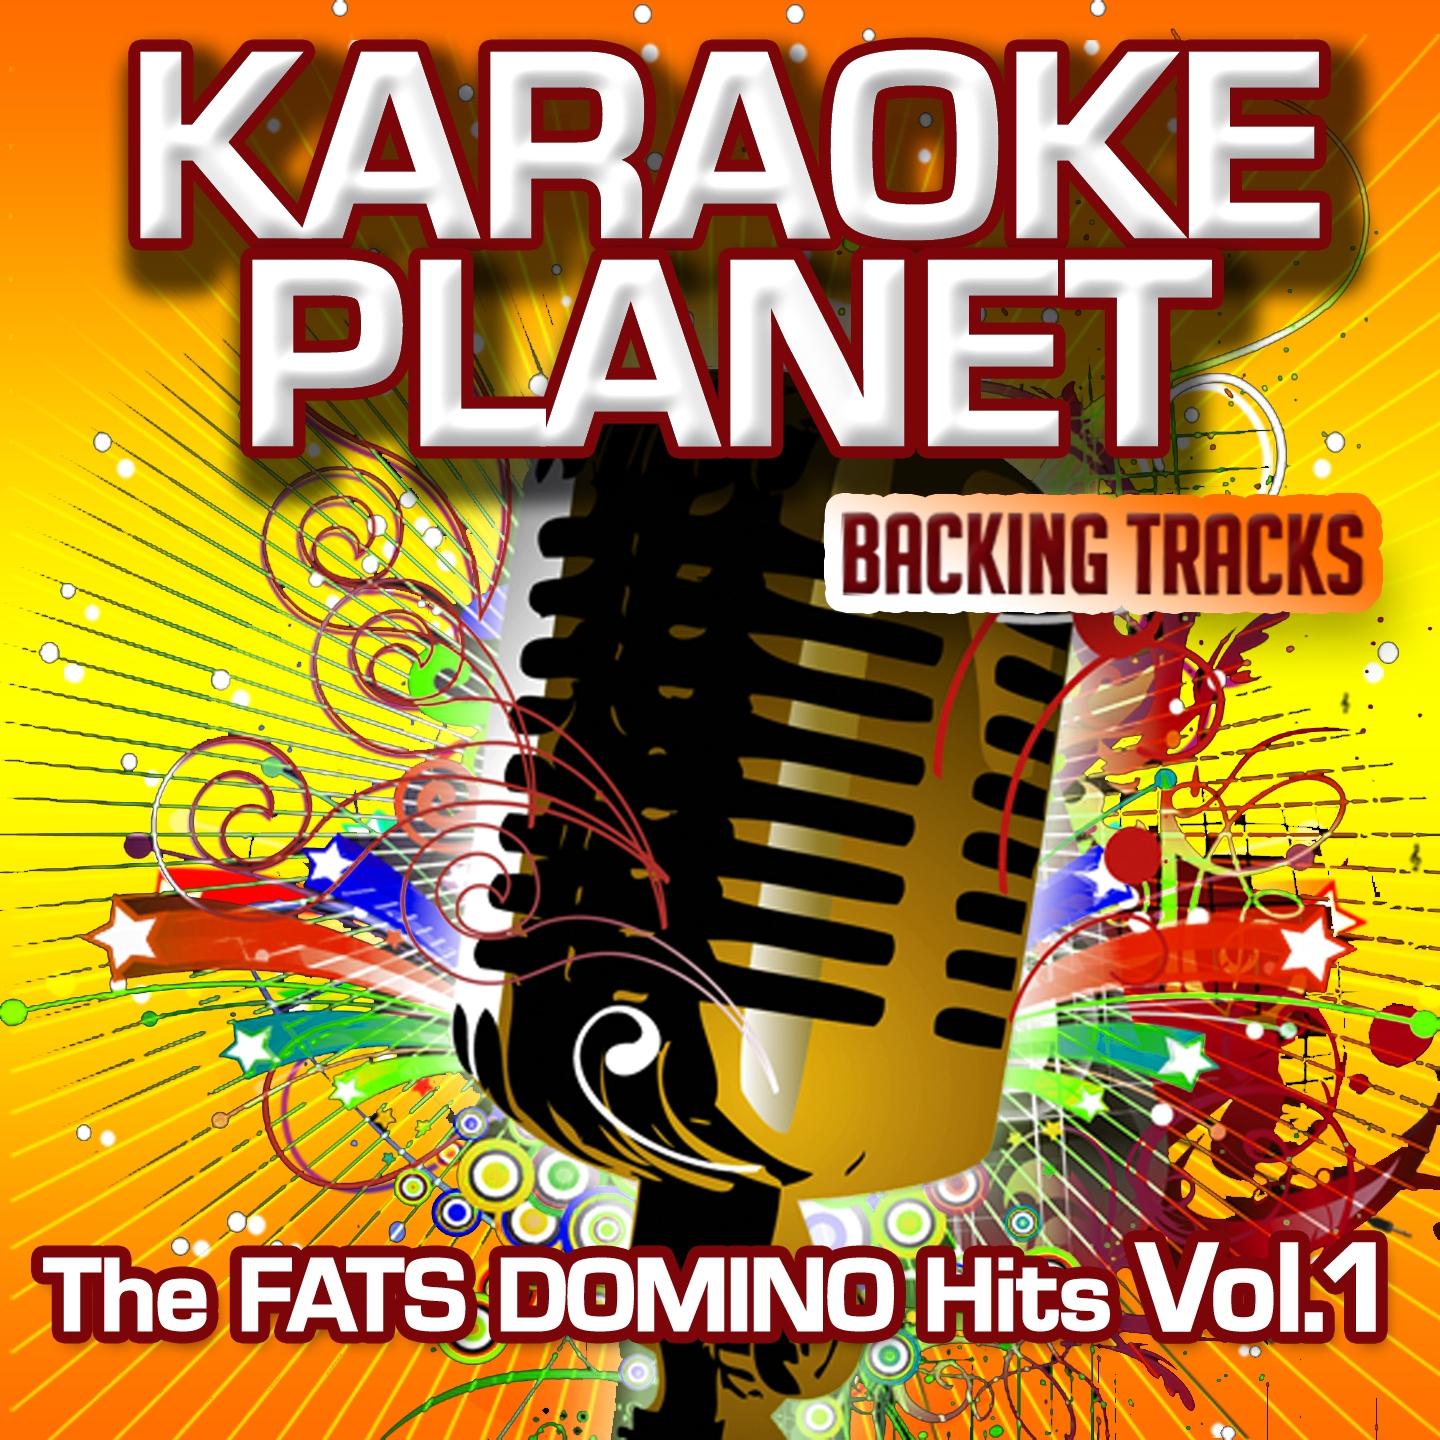 Ain't That a Shame (Karaoke Version In the Art of Fats Domino)